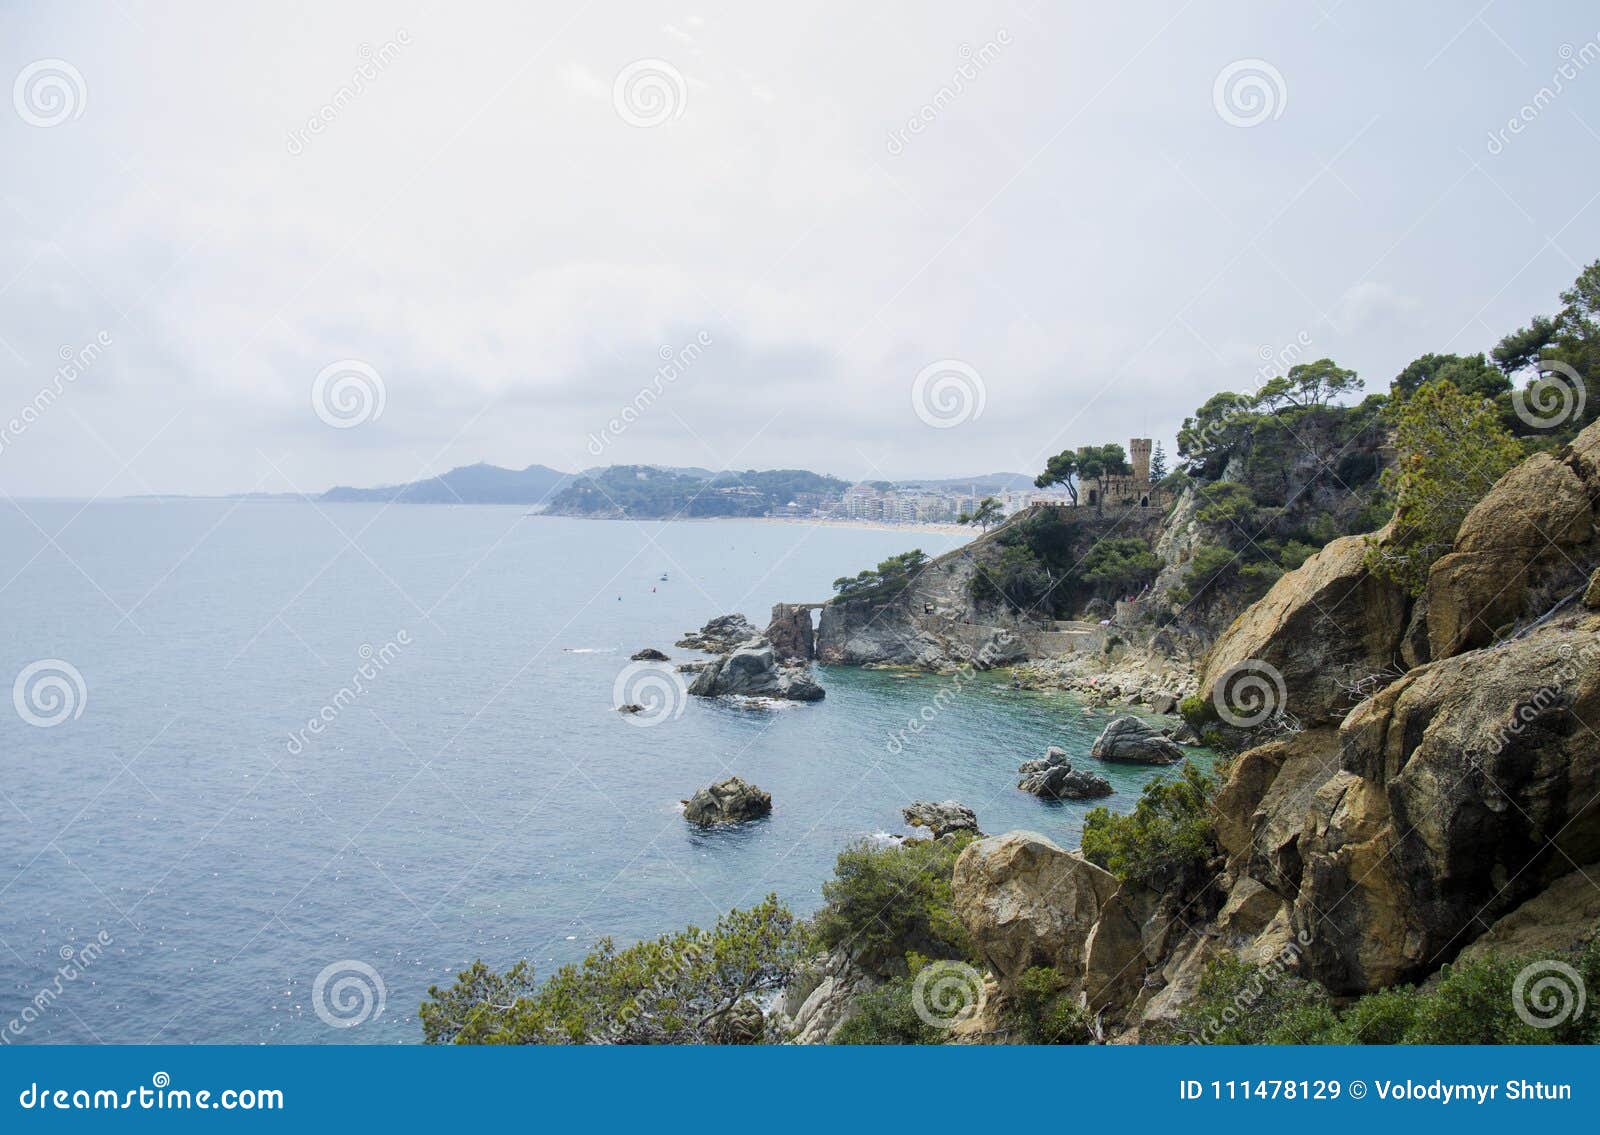 panoramic view of lloret de mar castle at sunset, costa brava between barcelona and girona, spain. ancient fortress in